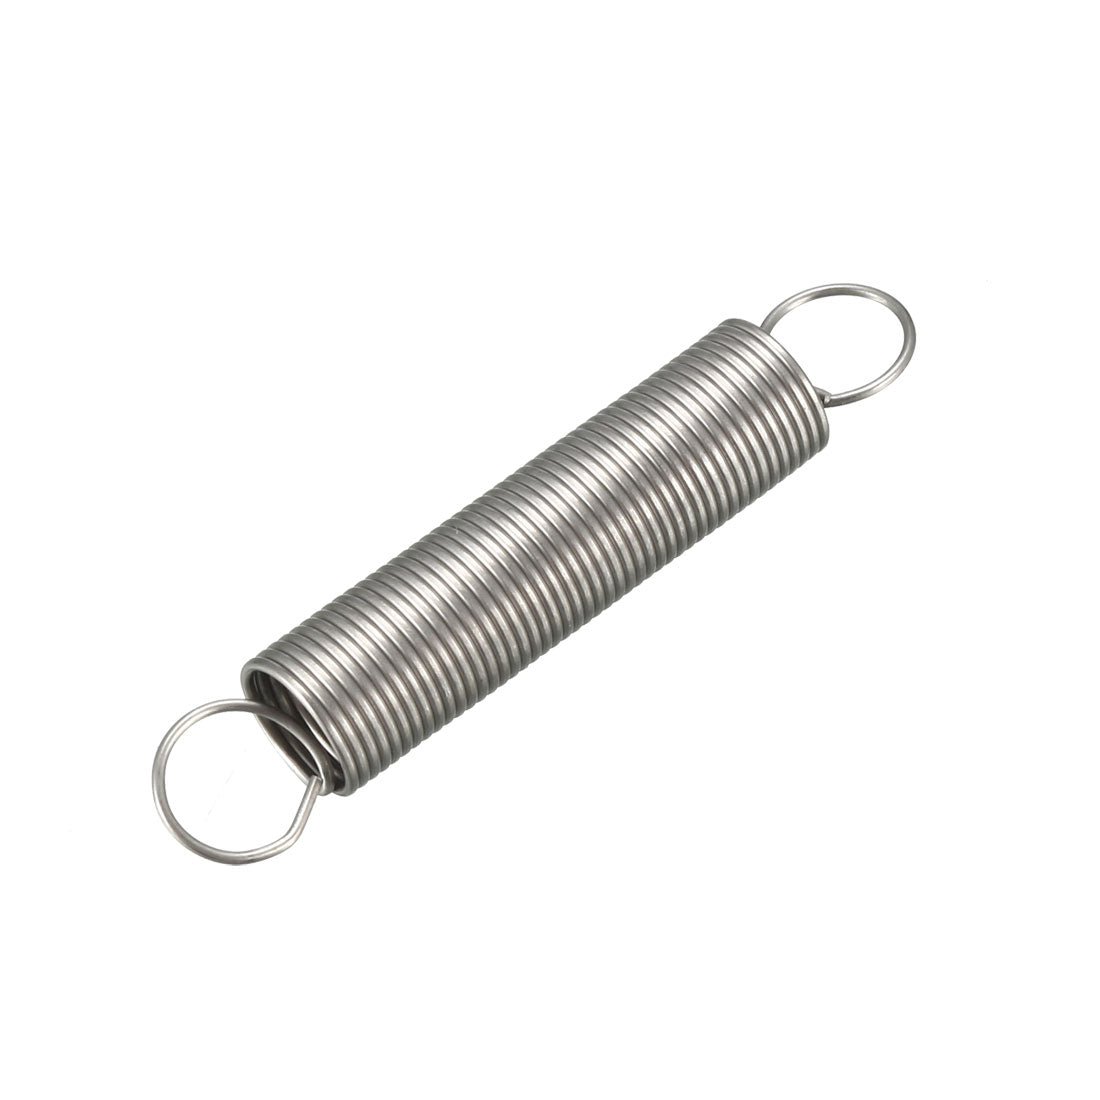 uxcell Uxcell Extended Tension Spring Wire Diameter 0.02", OD 0.24", Free Length 1.38" 10pcs